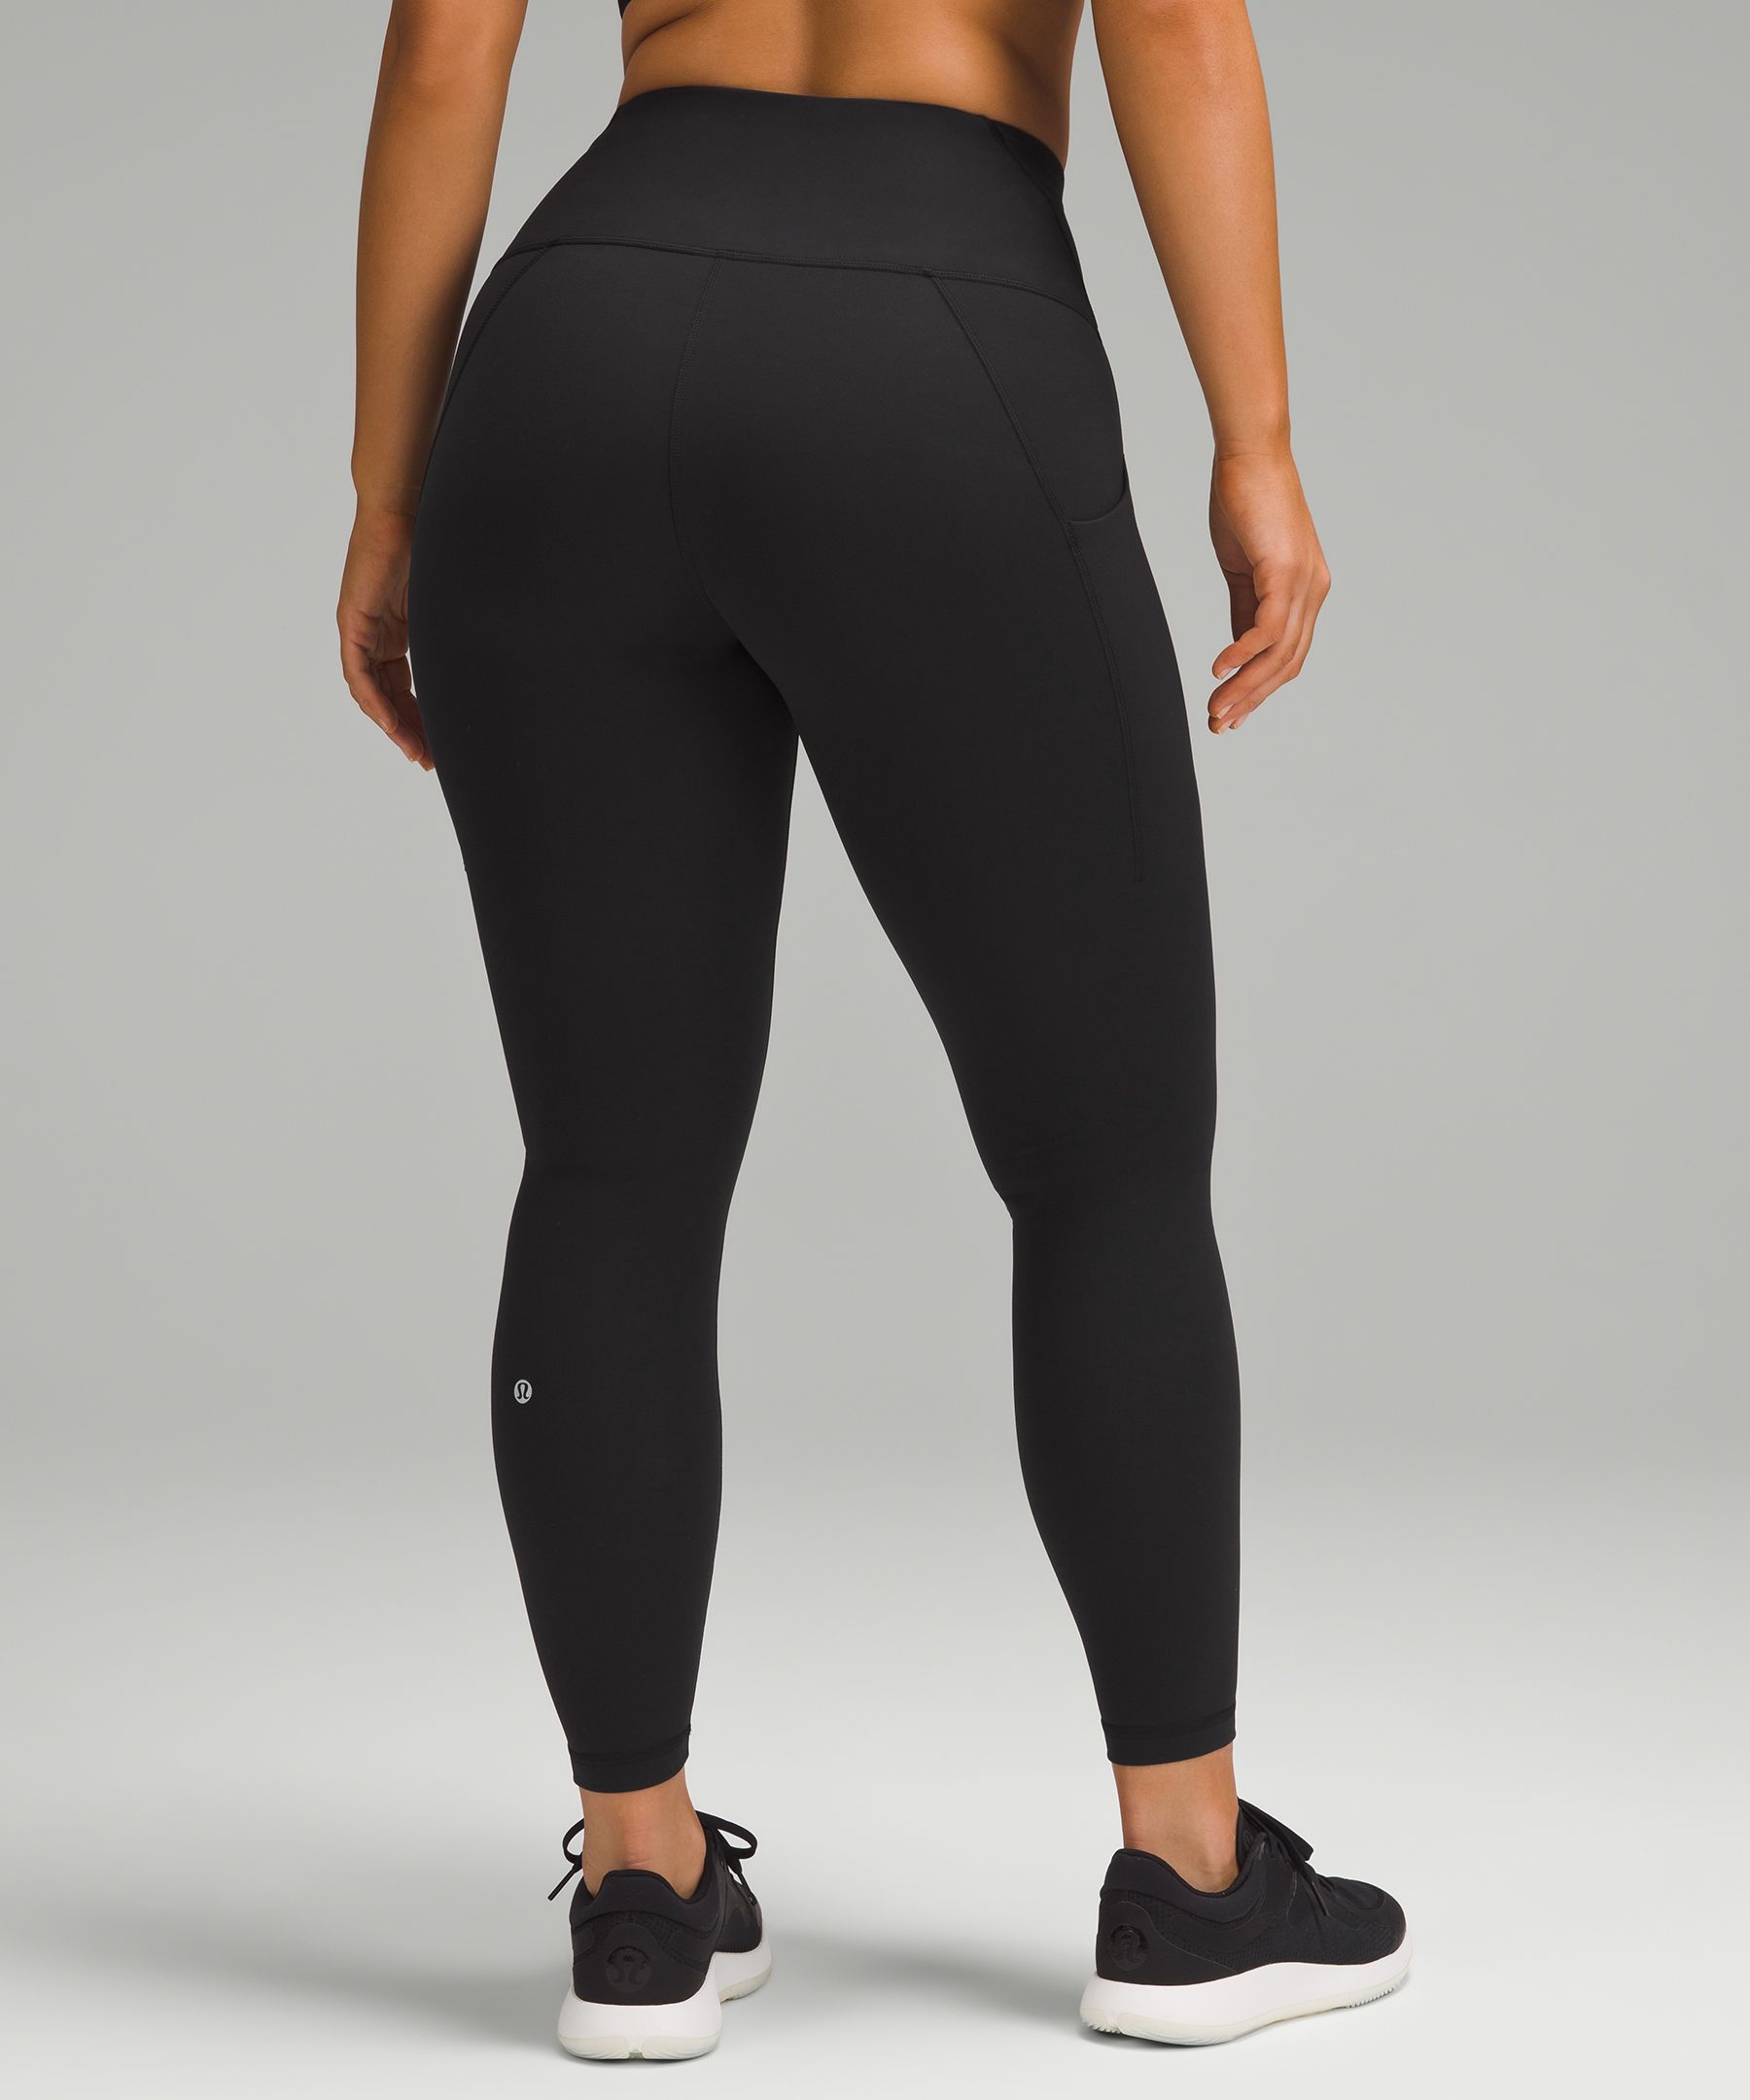 Wunder Train Contour Fit High-Rise Tight with Pockets 25" | Women's Leggings/Tights